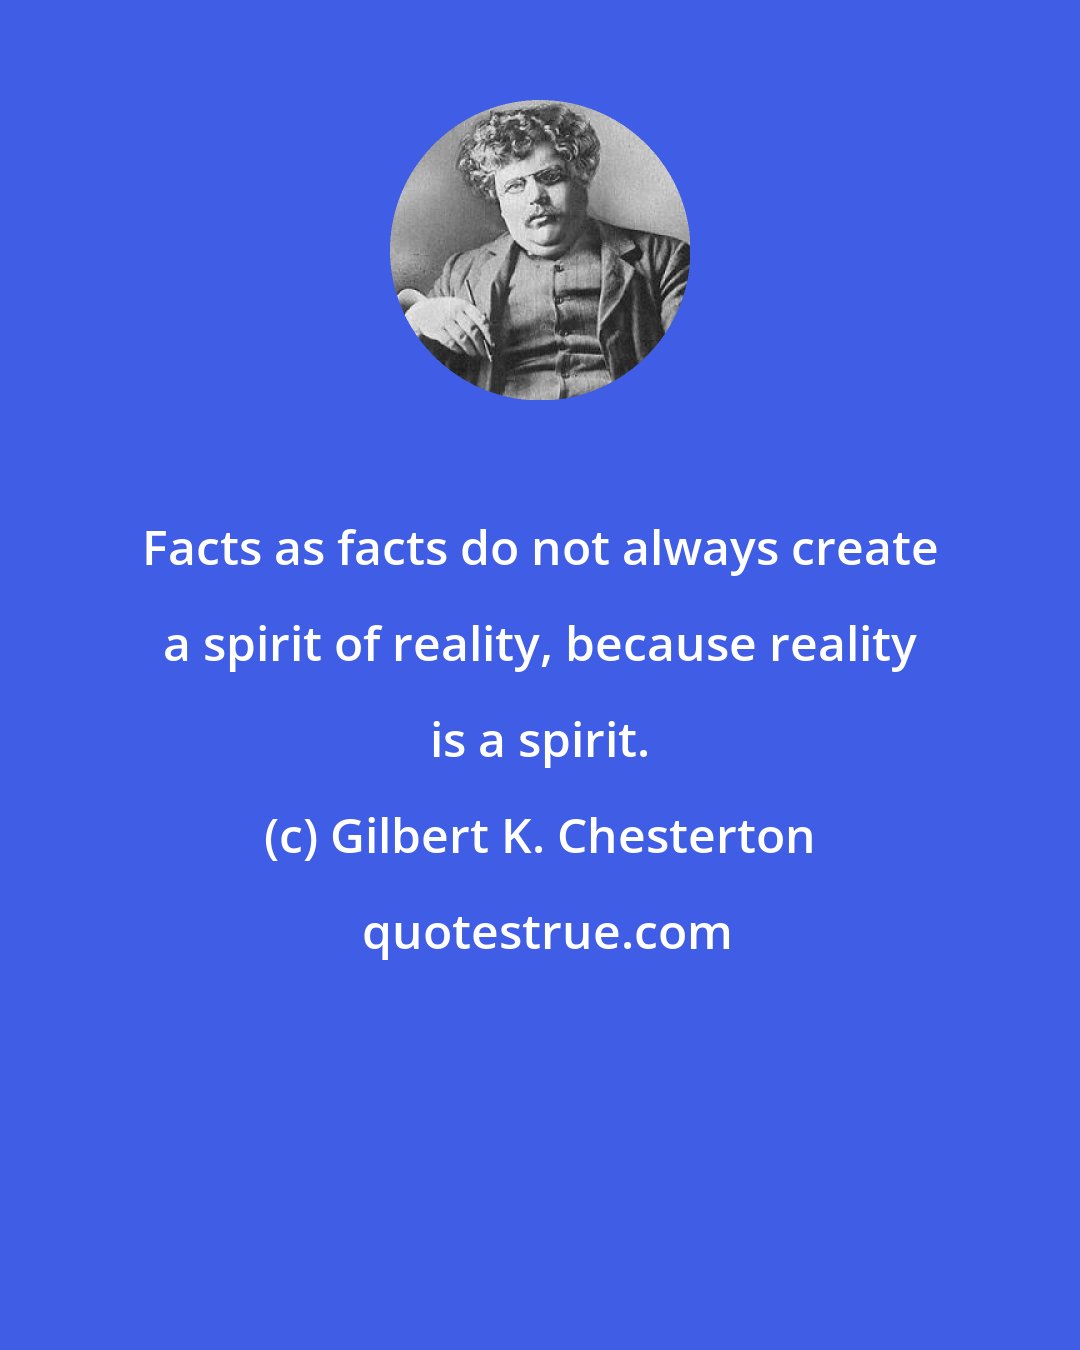 Gilbert K. Chesterton: Facts as facts do not always create a spirit of reality, because reality is a spirit.